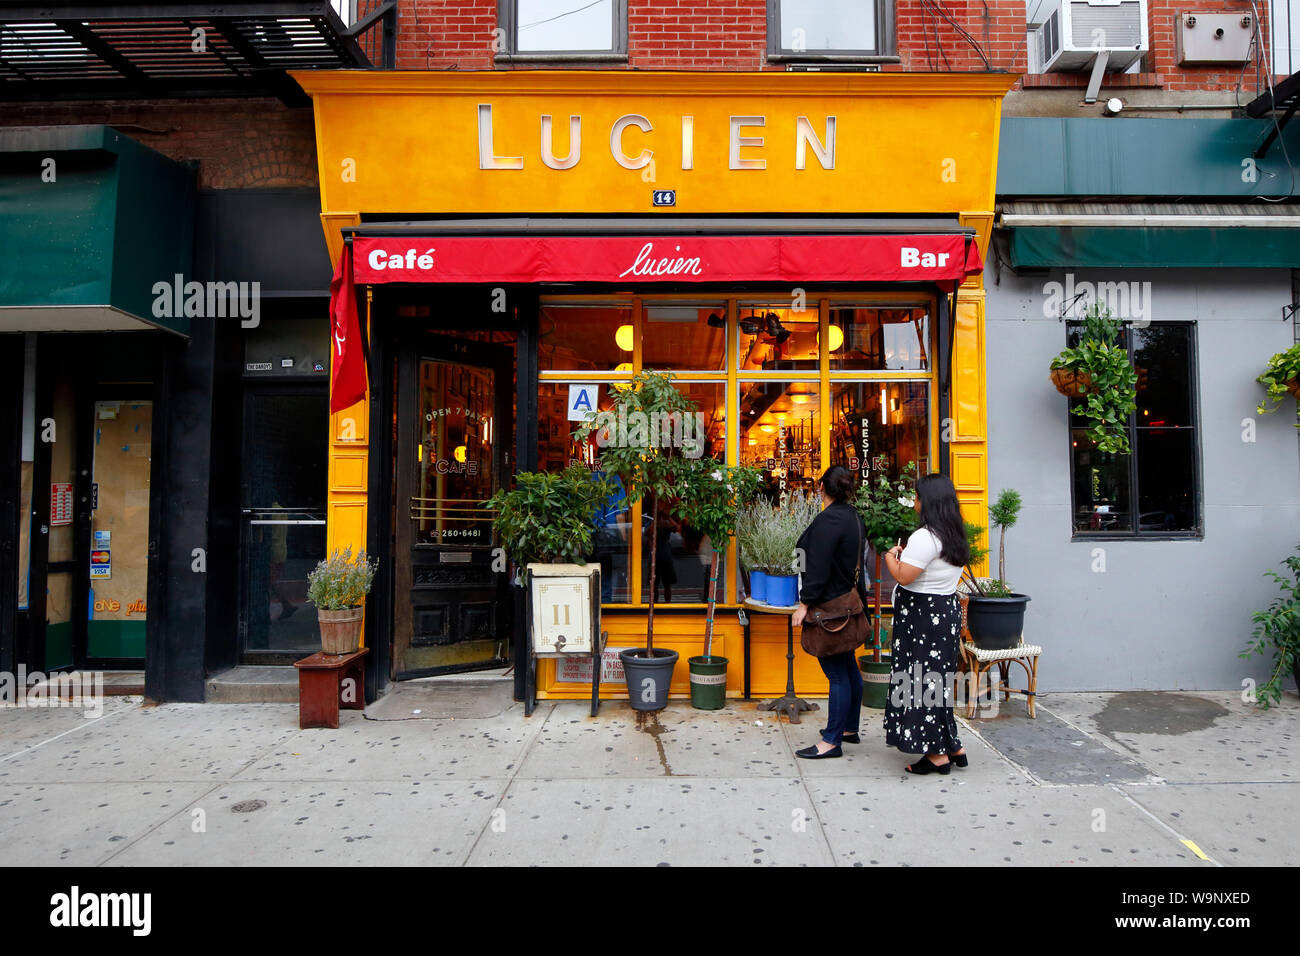 Lucien, 14 First Avenue, New York, NY. exterior storefront of a french brasserie in the East Village neighborhood of Manhattan. Stock Photo